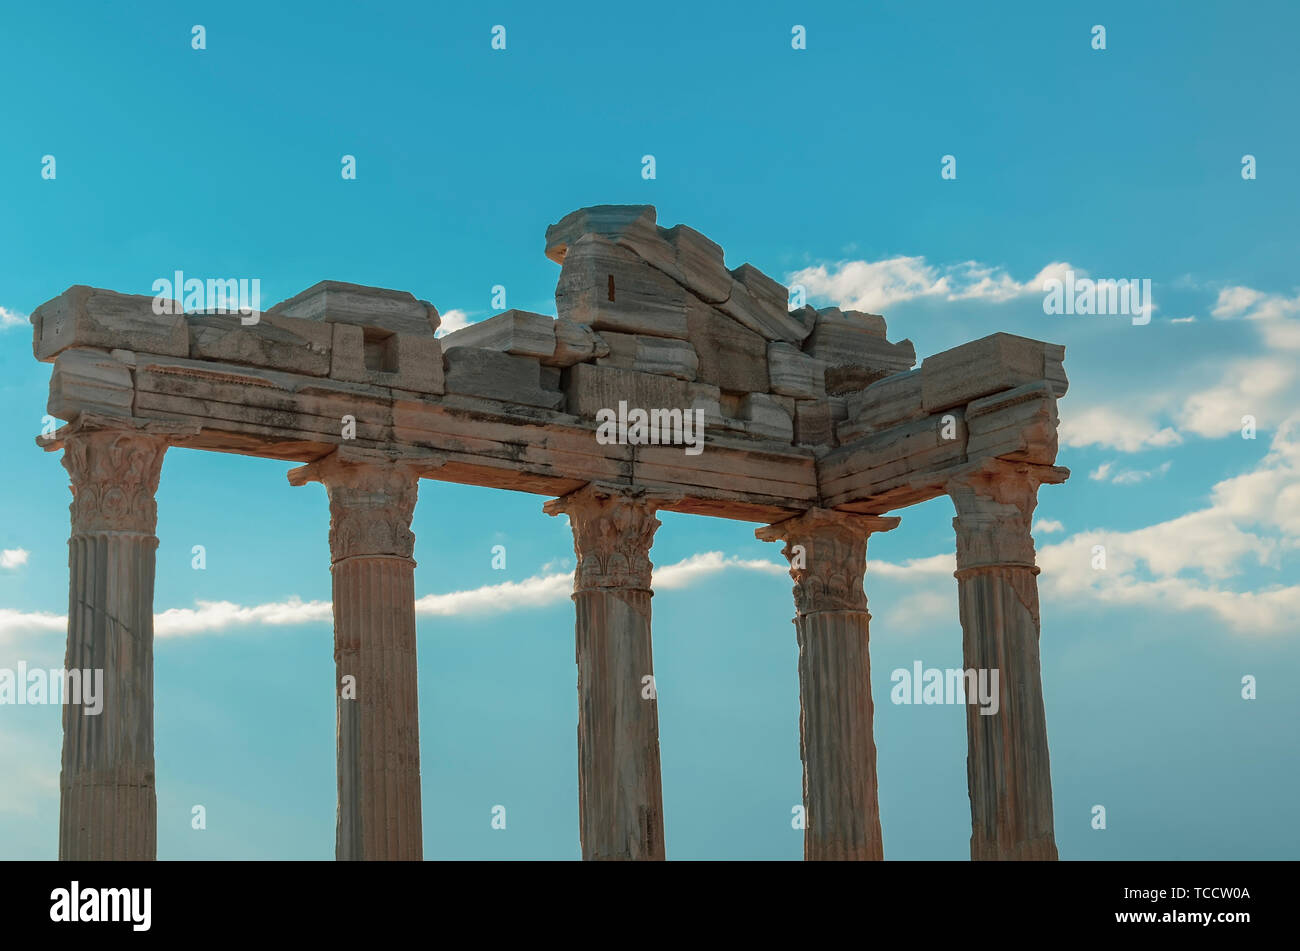 The ruins of the Temple of Apollo in ancient sity of Side in Turkey against the blue sky. Stock Photo